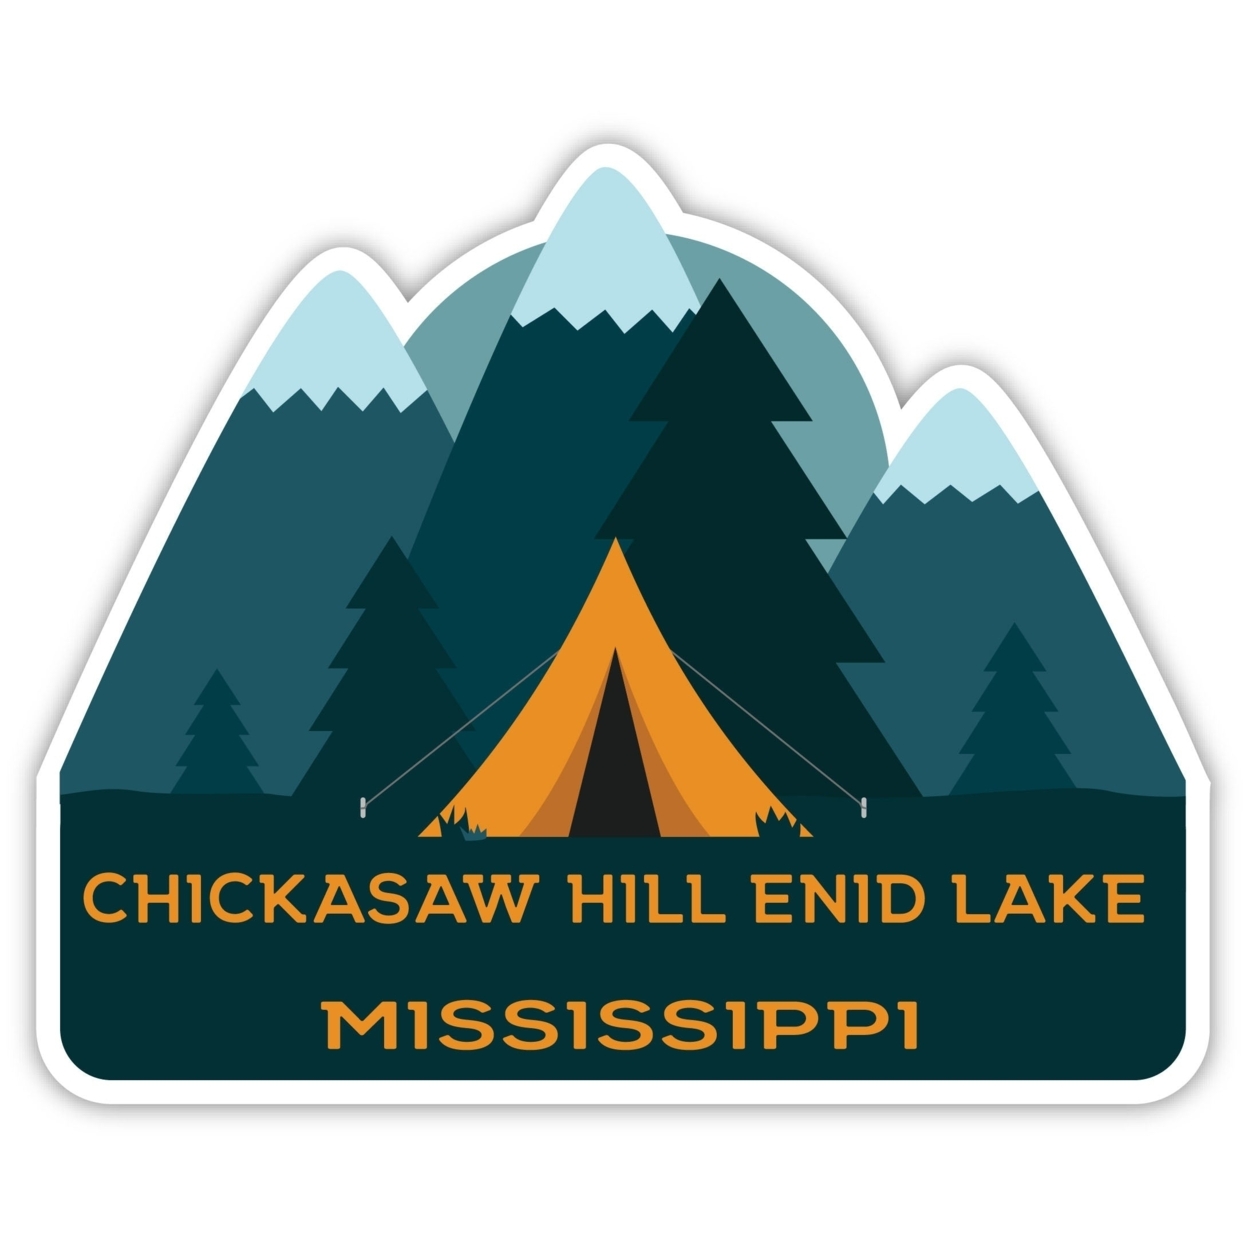 Chickasaw Hill Enid Lake Mississippi Souvenir Decorative Stickers (Choose Theme And Size) - Single Unit, 12-Inch, Tent